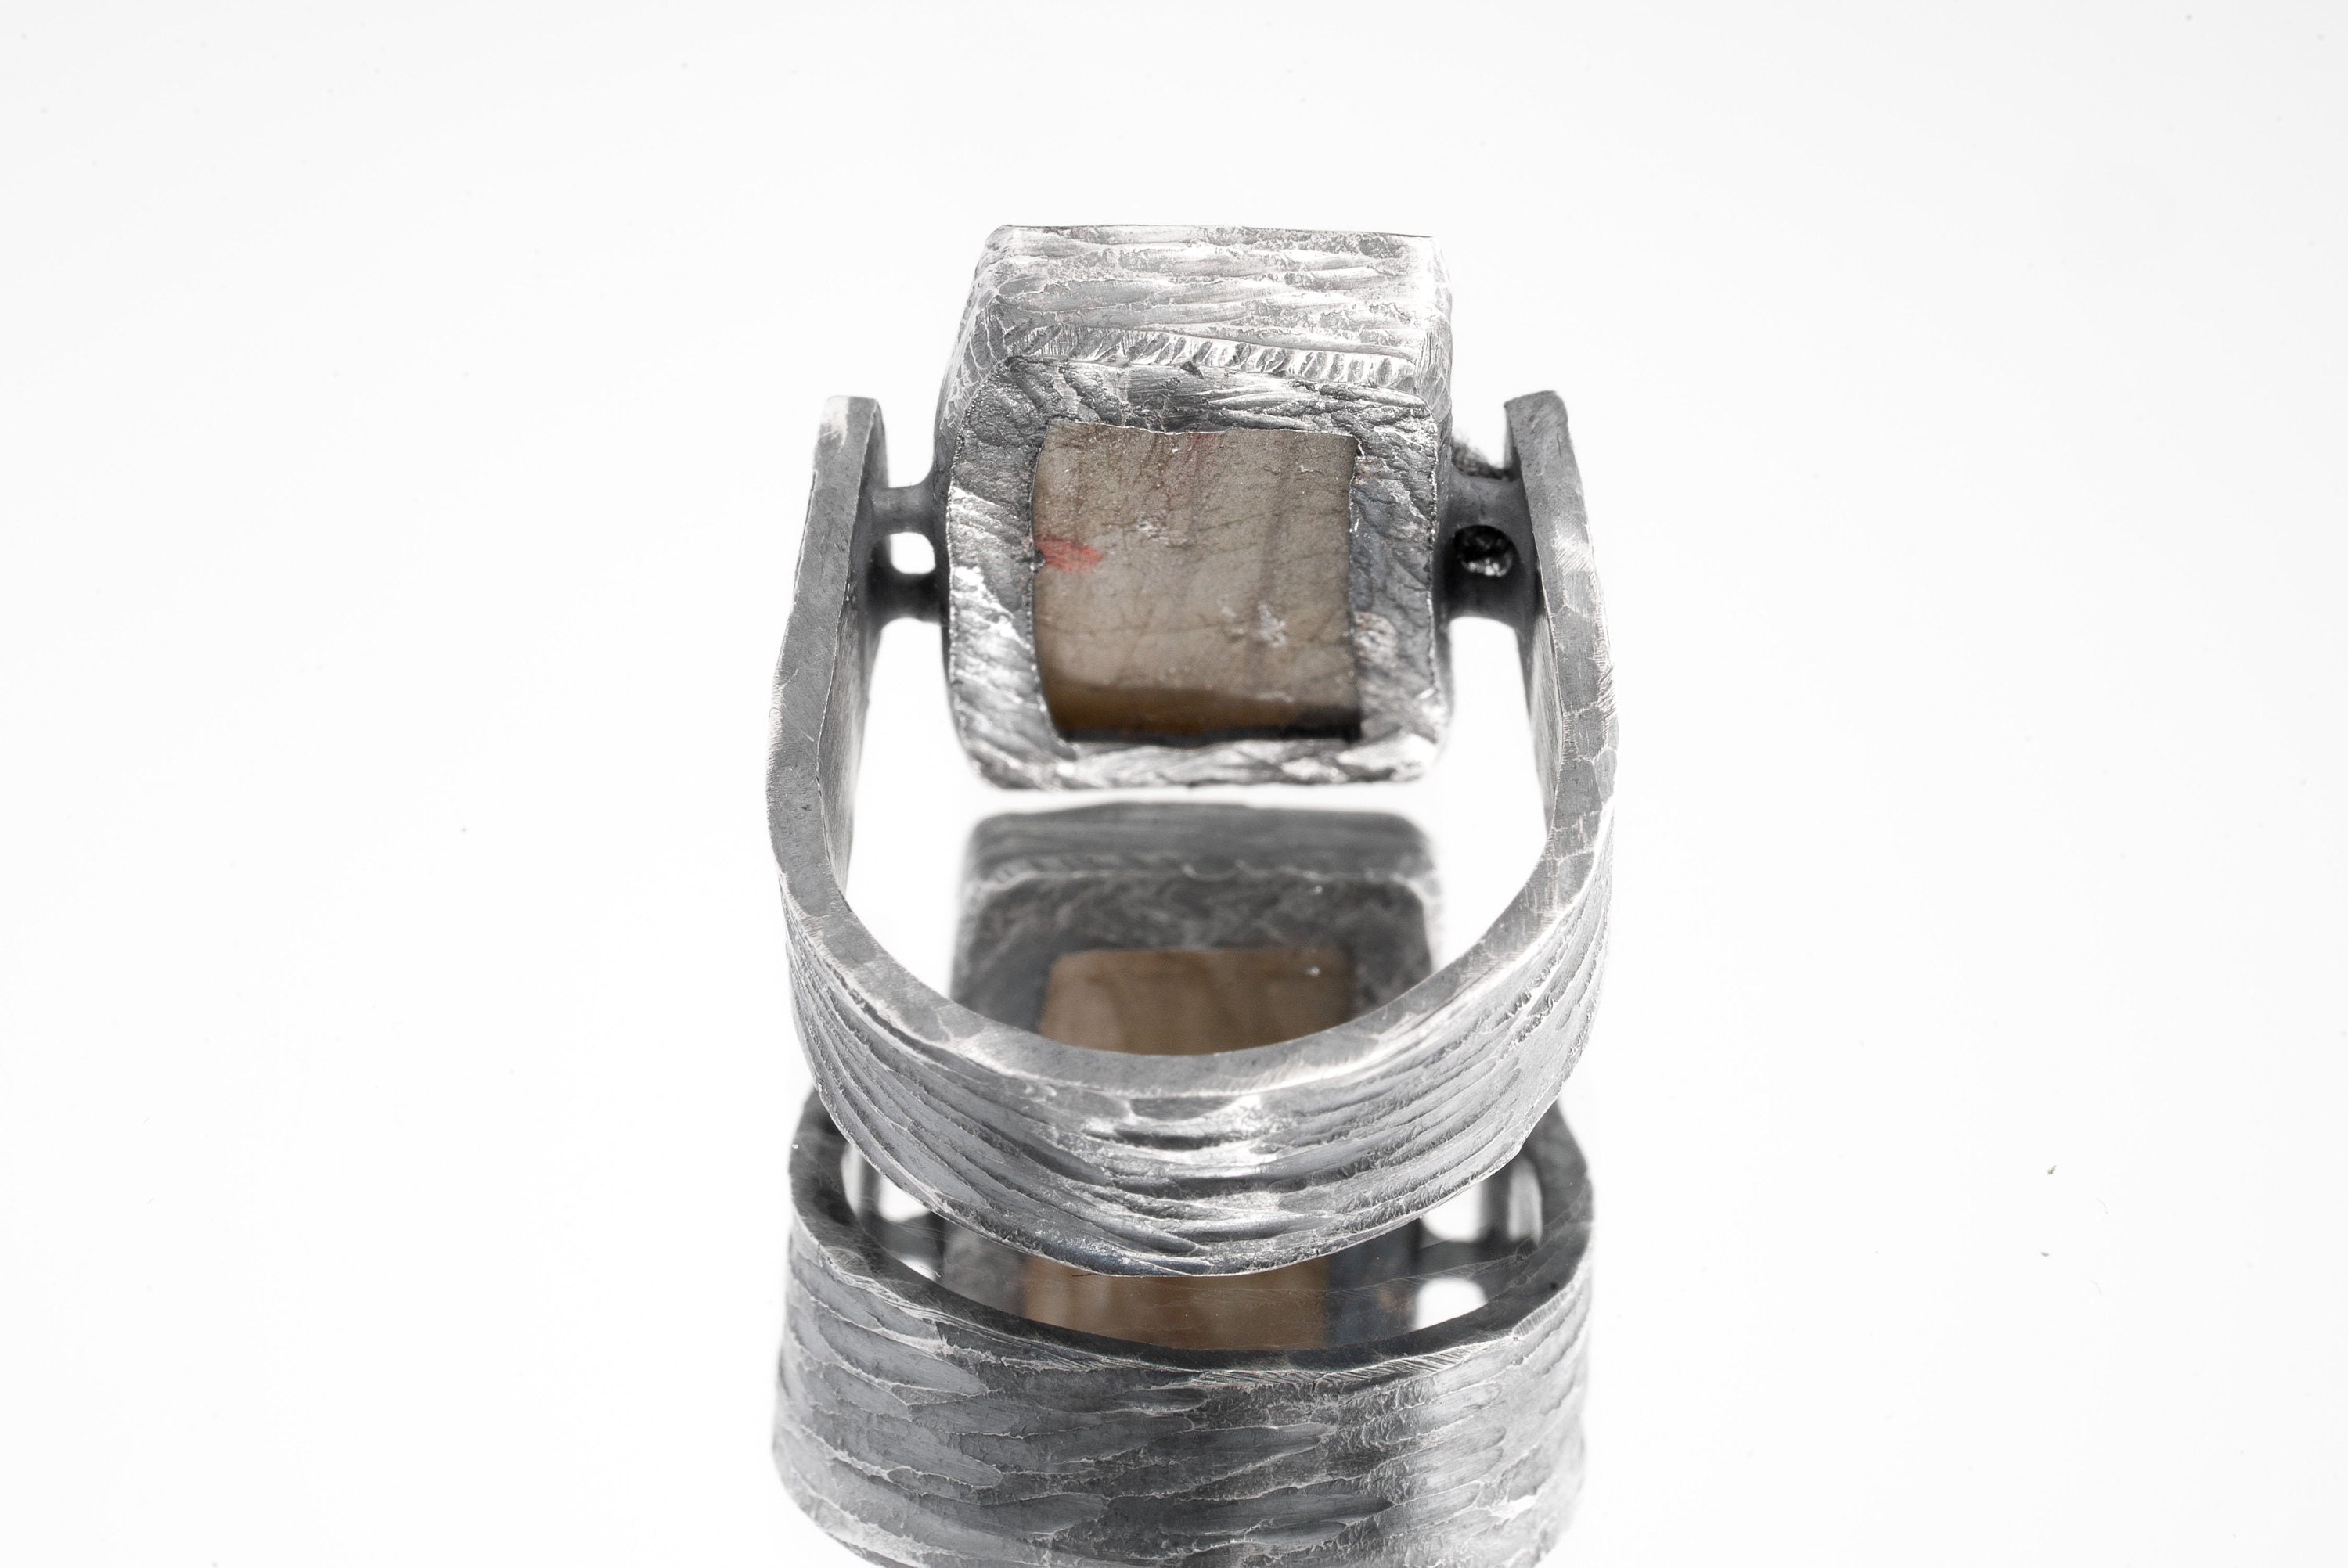 Raw Square Rainbow Labradorite - Rustic Comfortable Crystal Ring - Size 8 1/2 US - 925 Sterling Silver - Hammer Textured & Oxidised